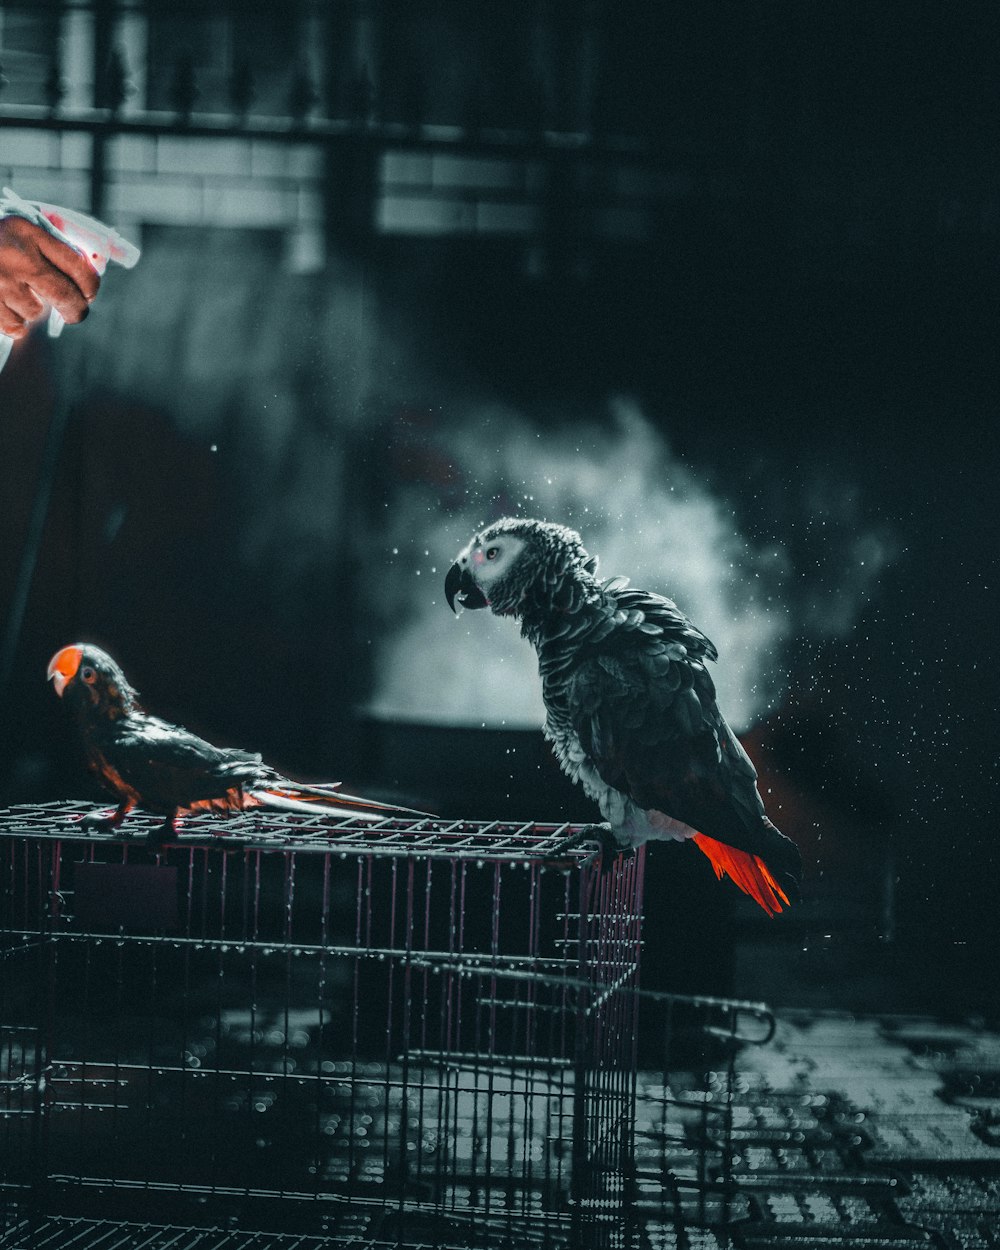 gray and white parrot on black metal cage